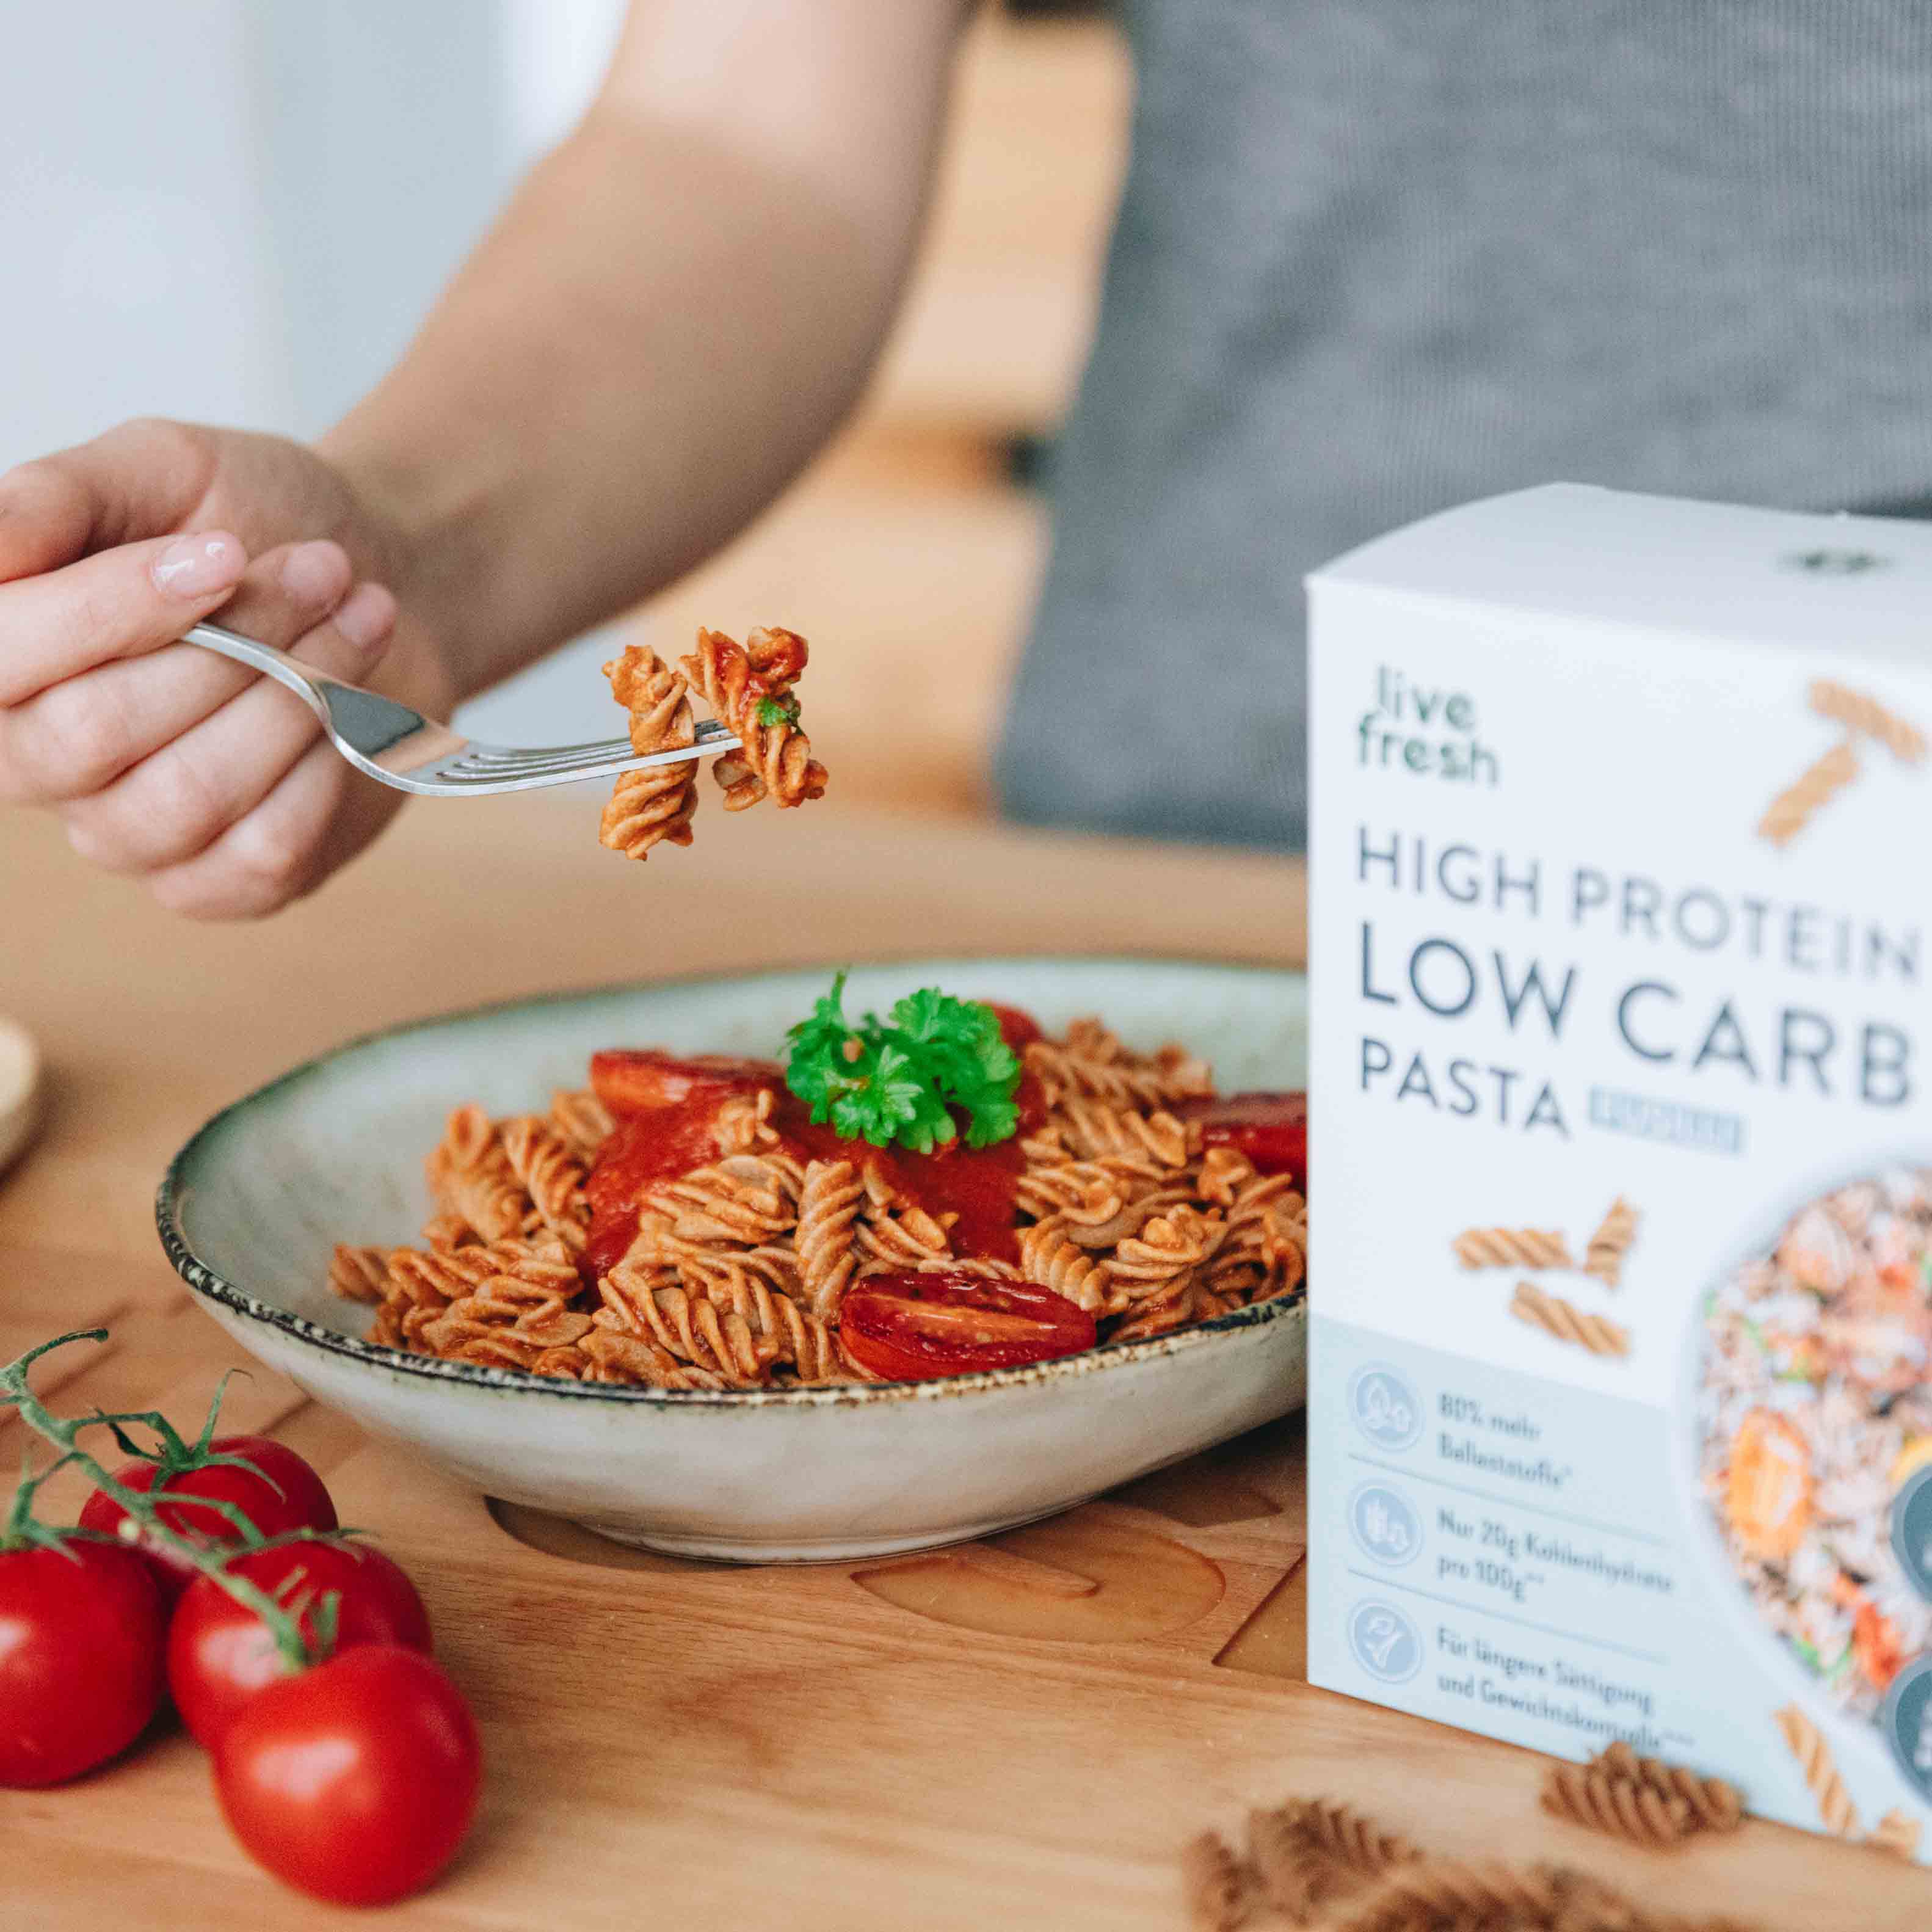 Low Carb High Protein Pasta - Fusilli